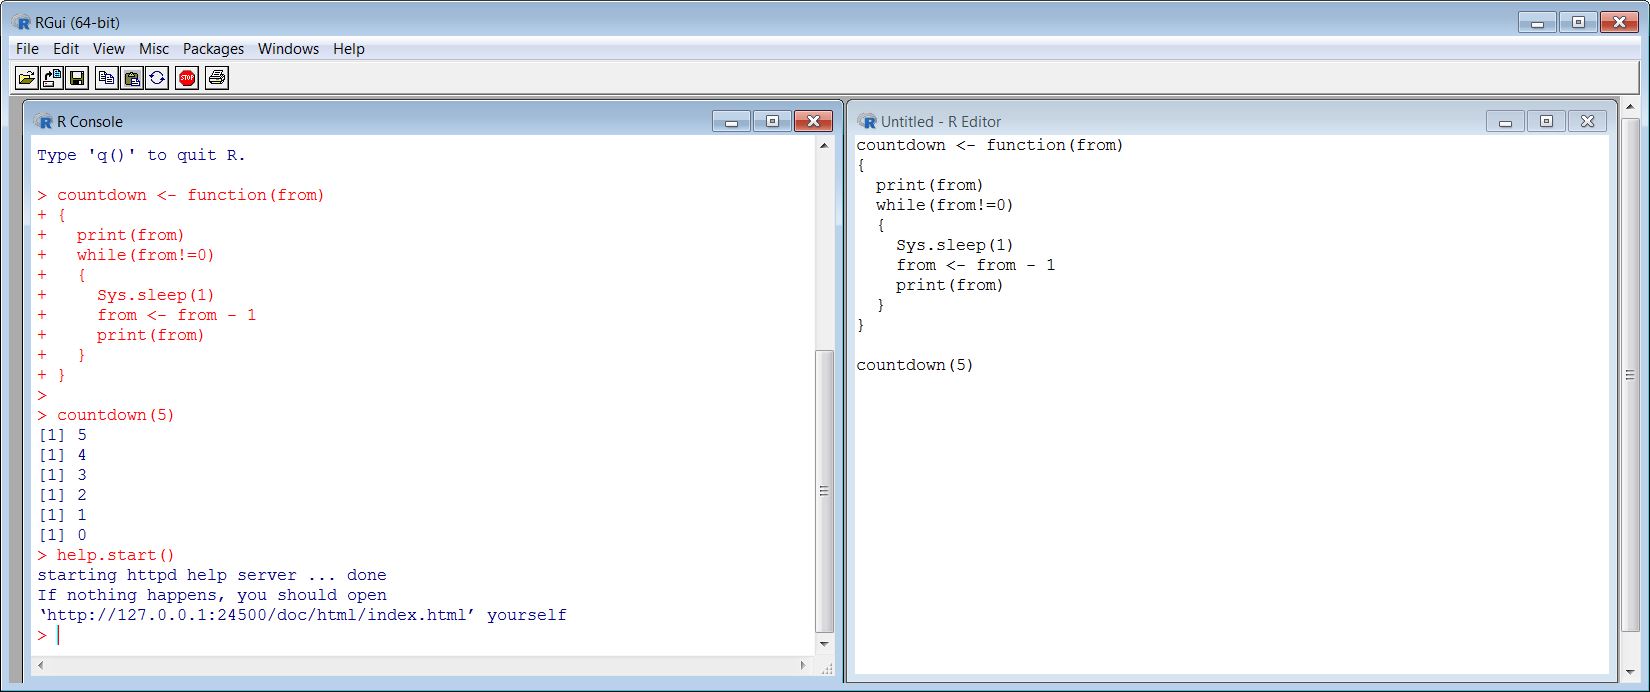 Screen capture of RGui: where Console i son the left and Editor is on the right